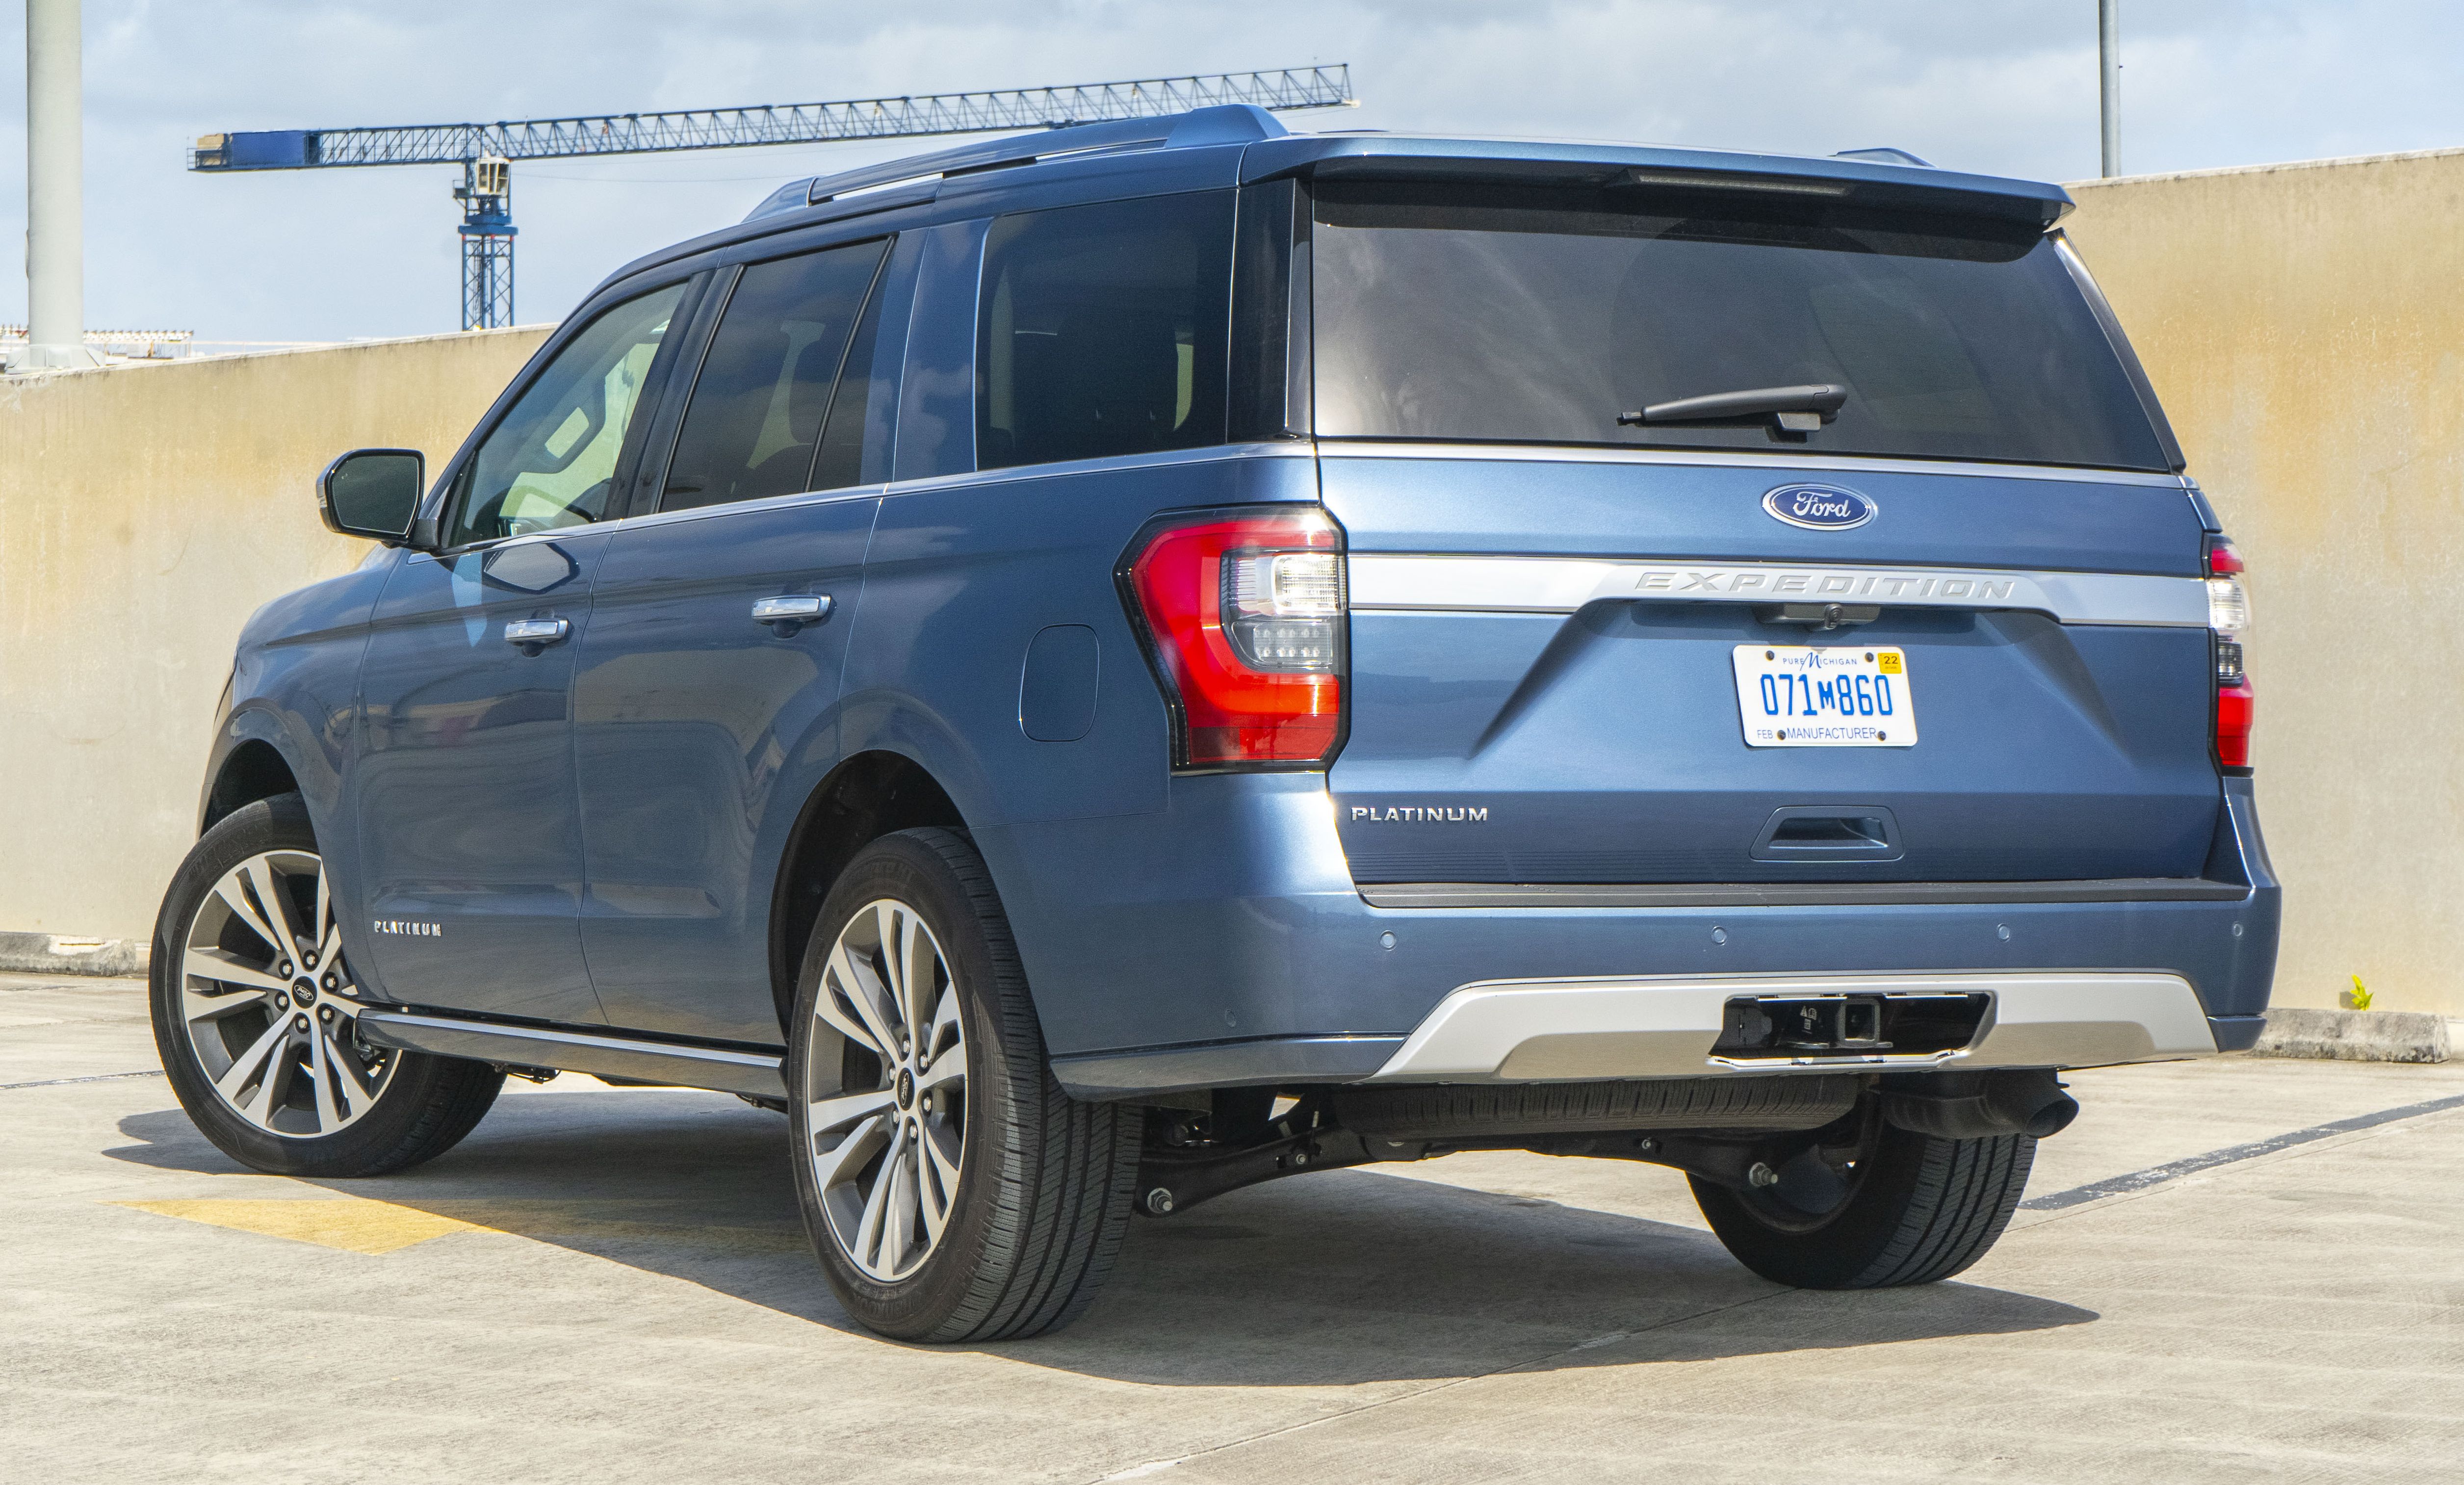 2020 Ford Expedition - Driven